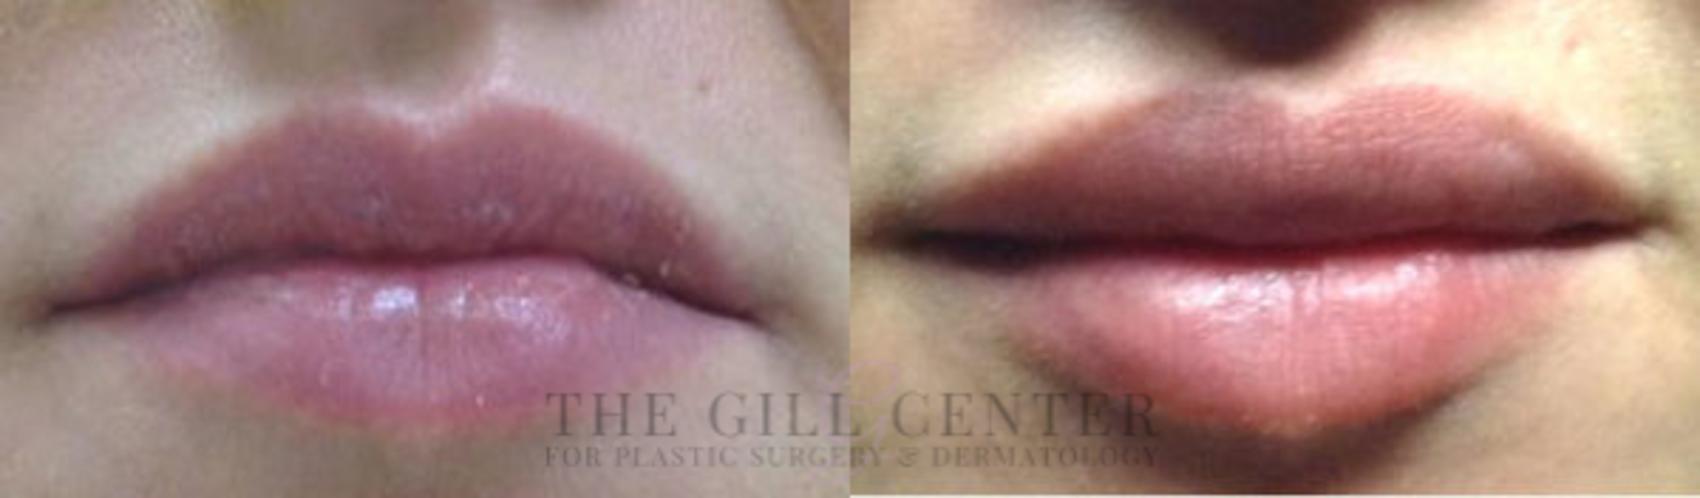 Lip Augmentation Case 365 Before & After Front | The Woodlands, TX | The Gill Center for Plastic Surgery and Dermatology